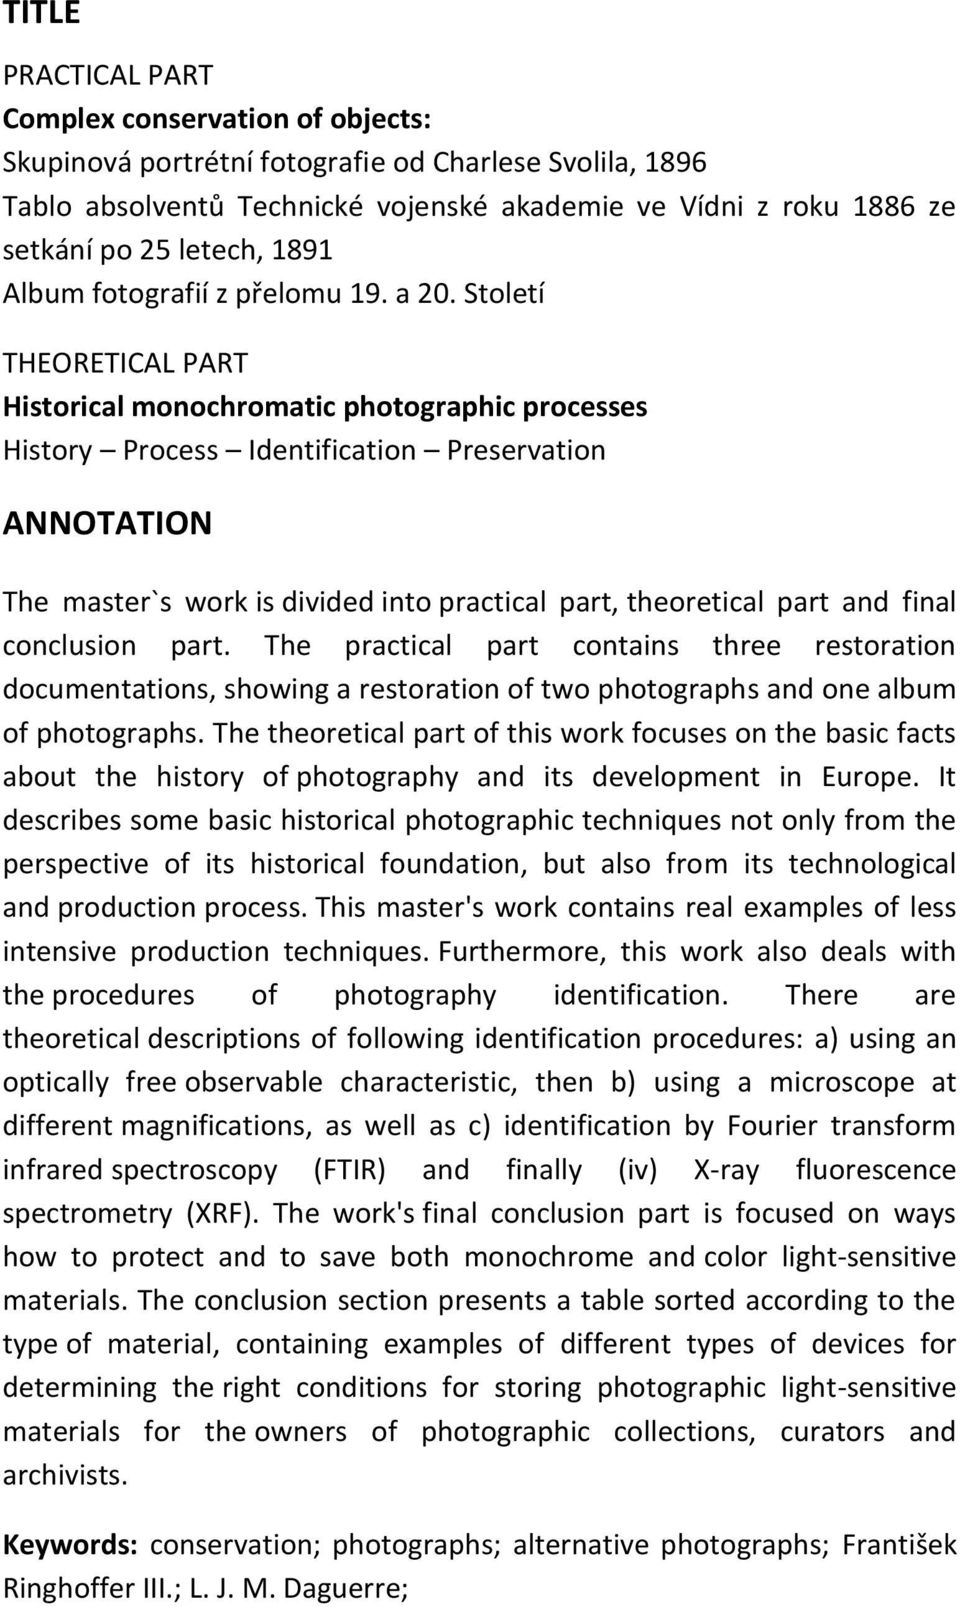 Století THEORETICAL PART Historical monochromatic photographic processes History Process Identification Preservation ANNOTATION The master`s work is divided into practical part, theoretical part and